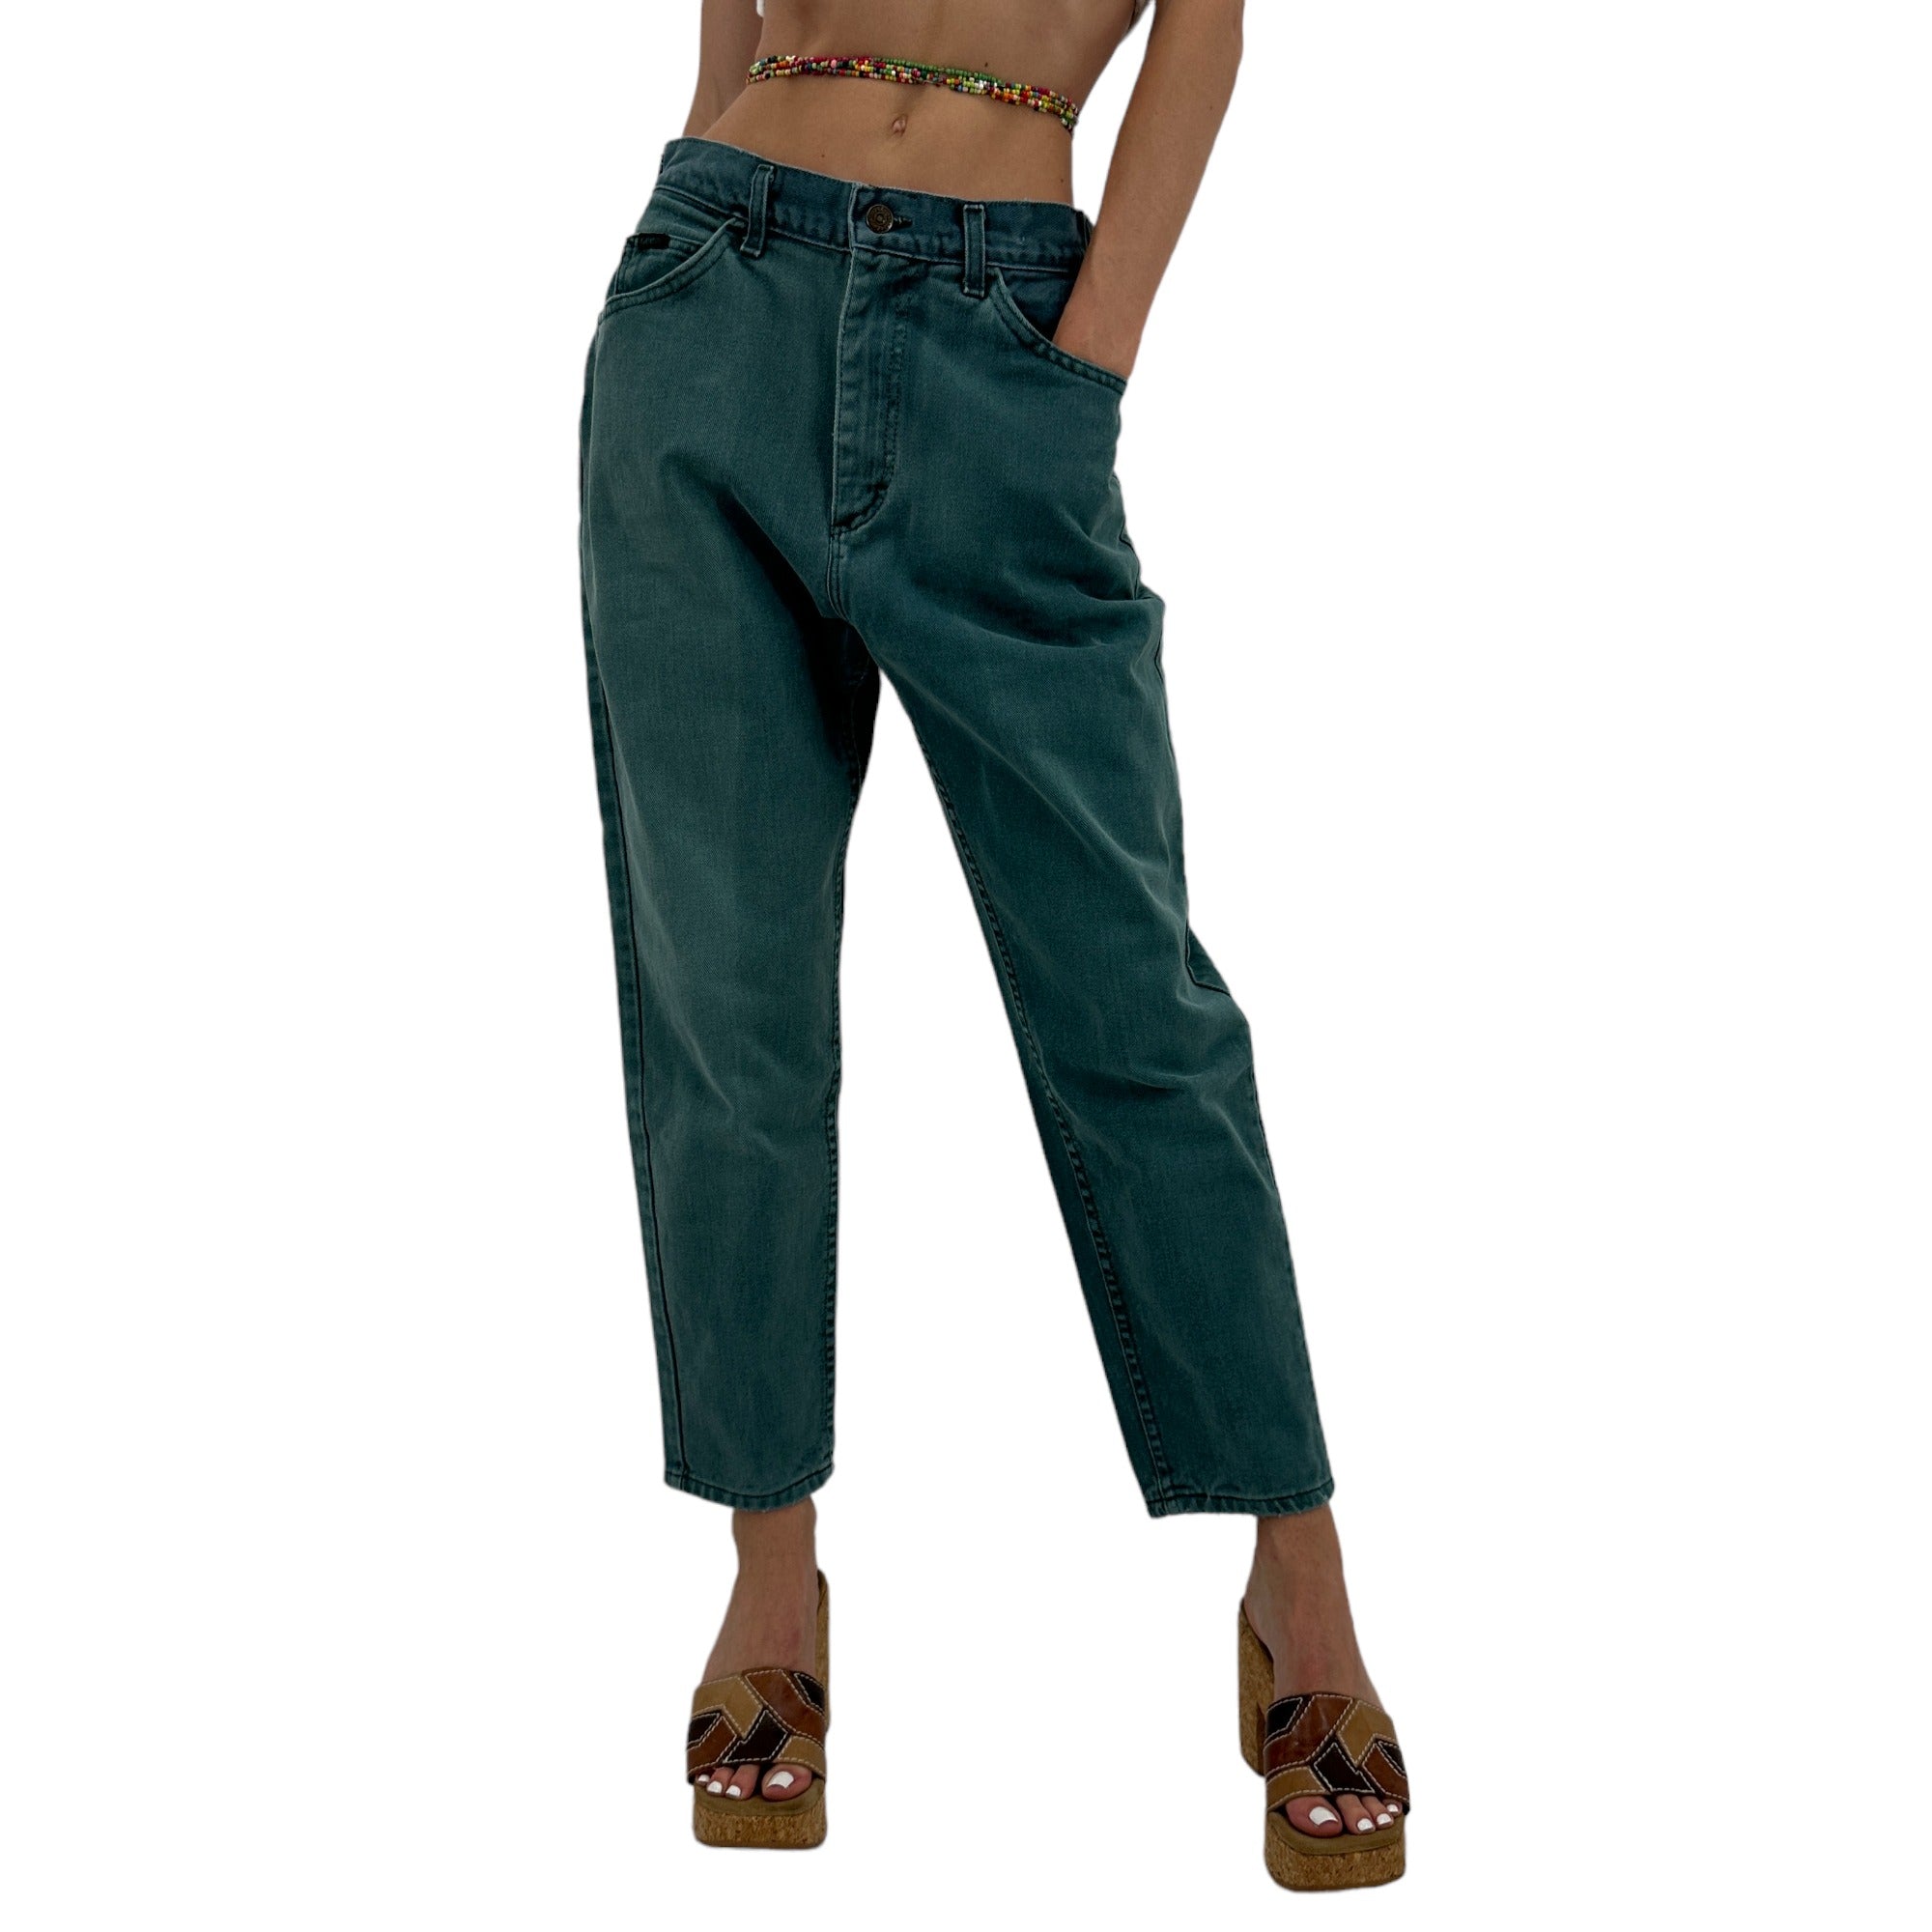 90s Vintage LEE Green Tapered Pants [XS, S]